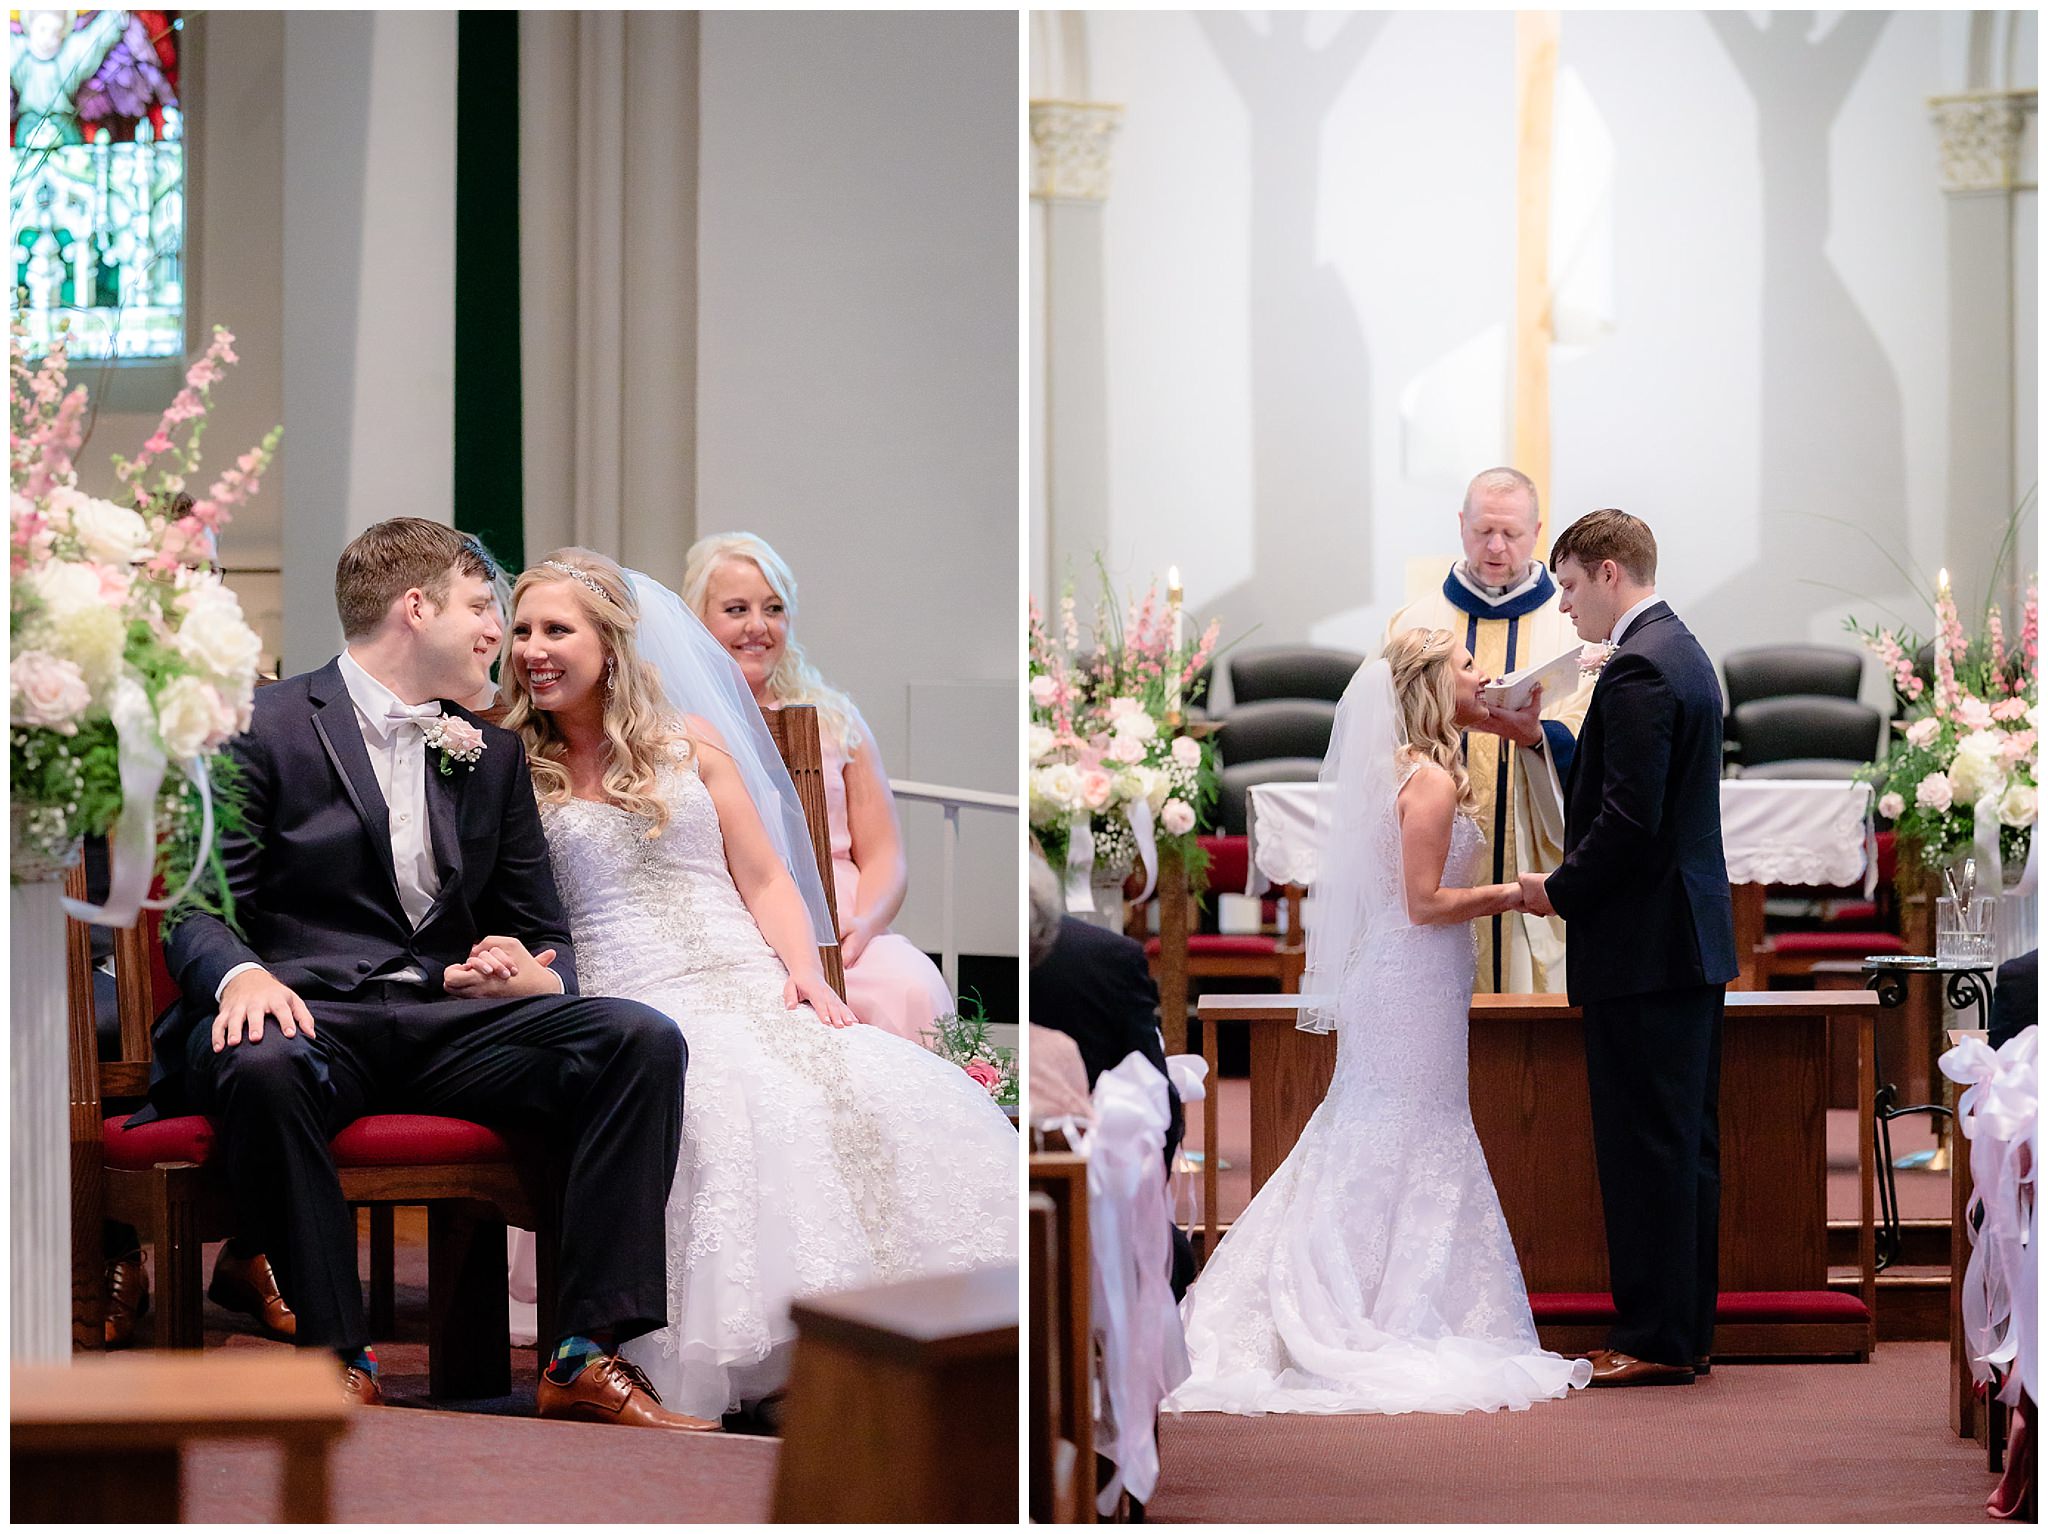 Wedding ceremony at Duquesne University Chapel of the Holy Spirit